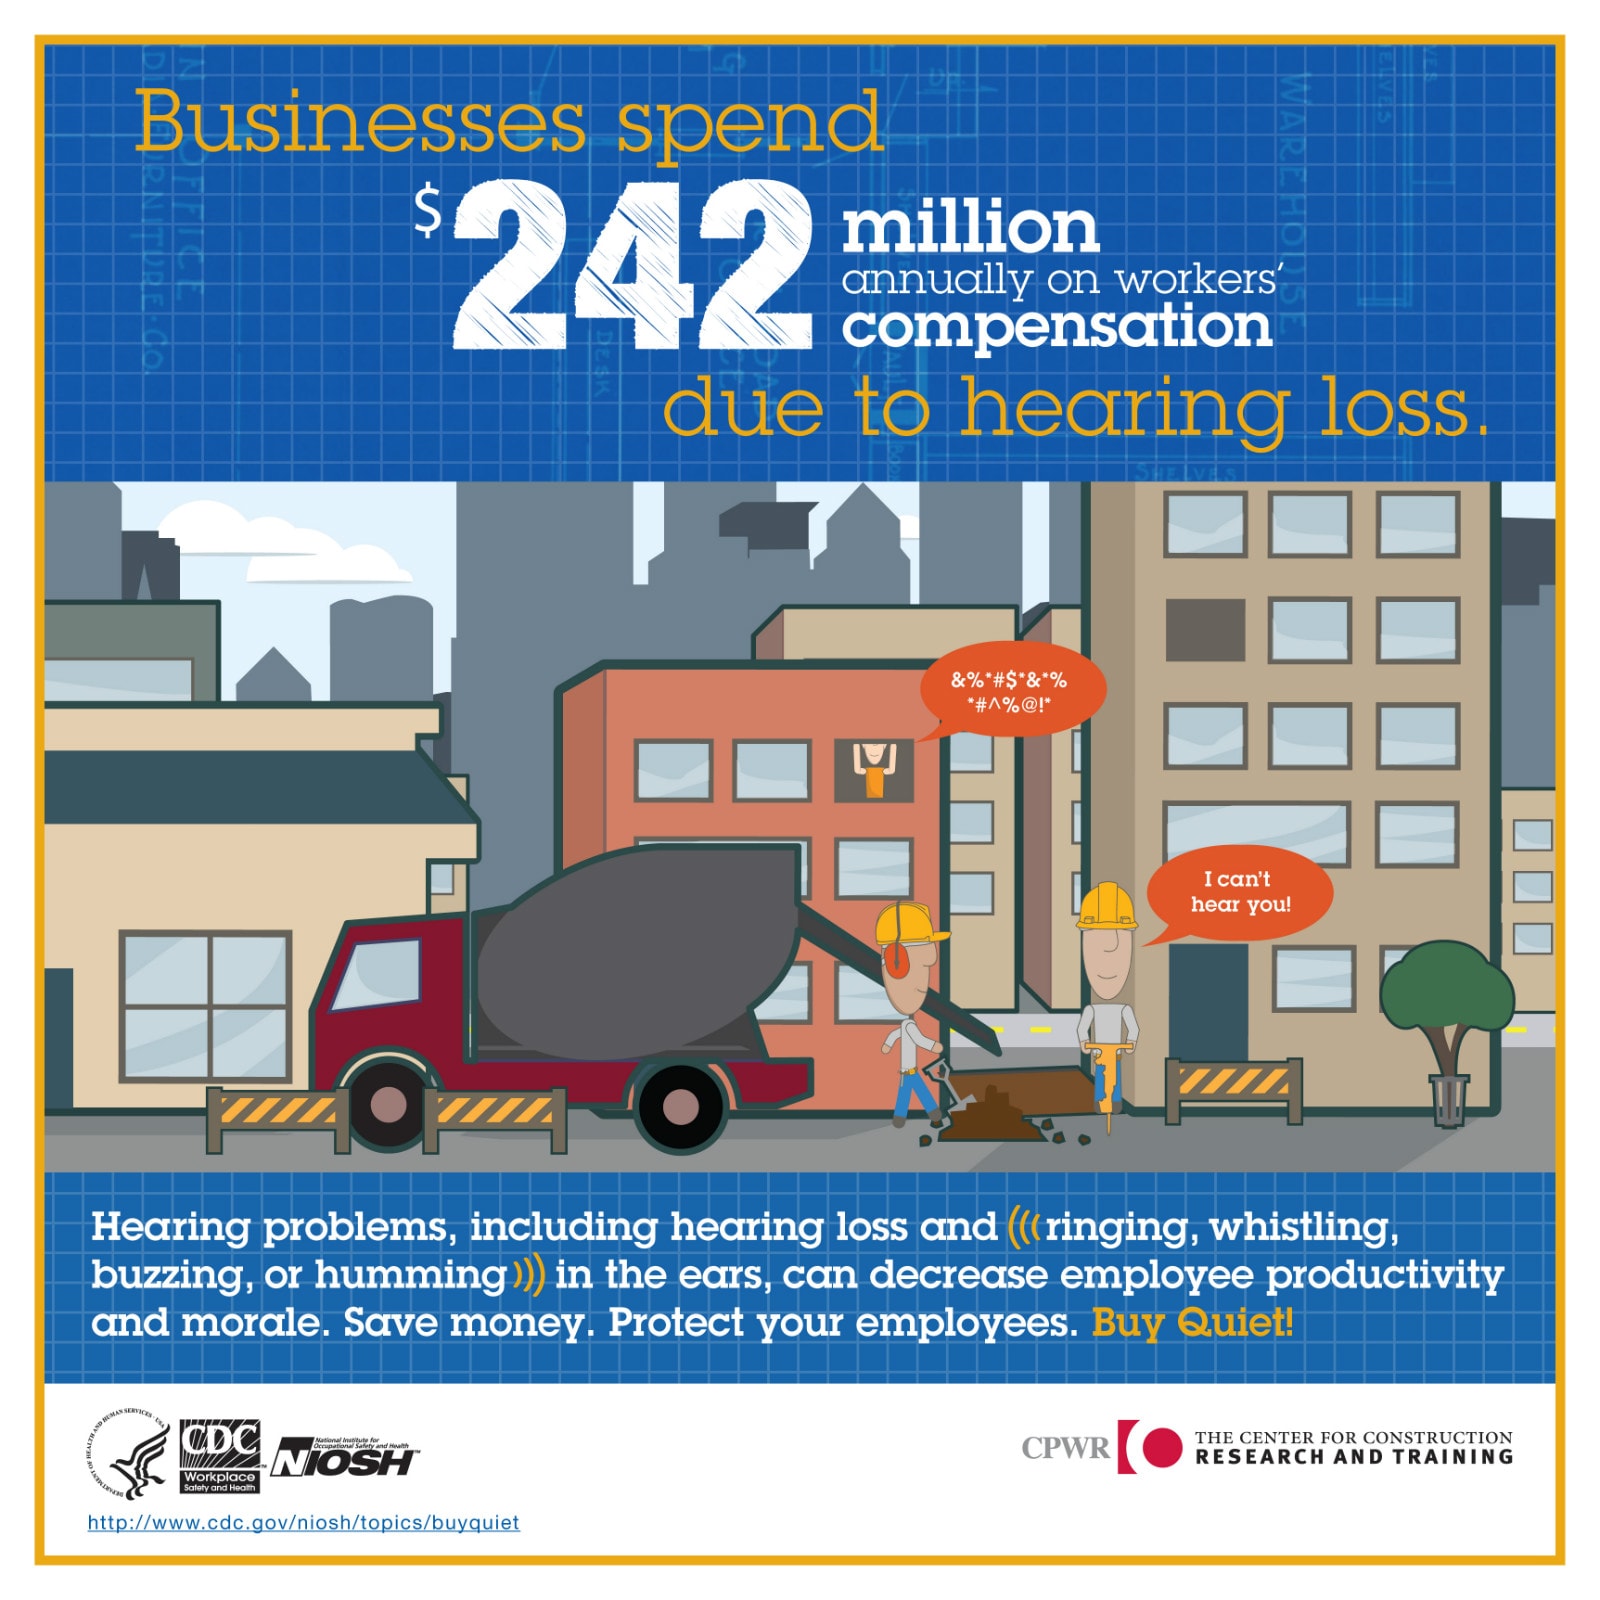 Businesses spend $242 million annually on workers' compensation due to hearing loss